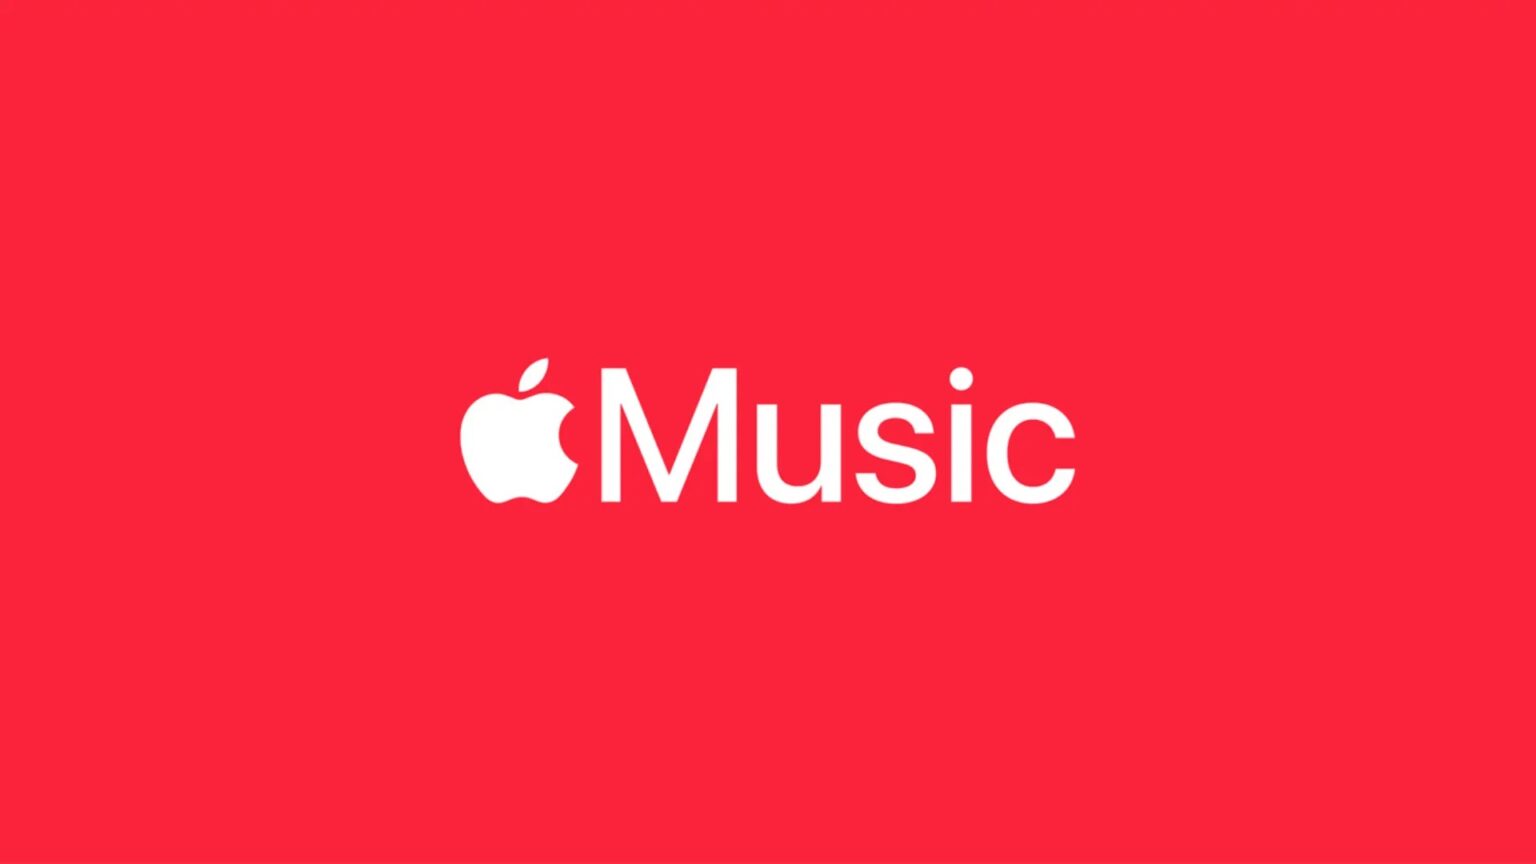 First-time Apple Music subscribers get just a 1-month free trial now (unless they bought an Apple device).